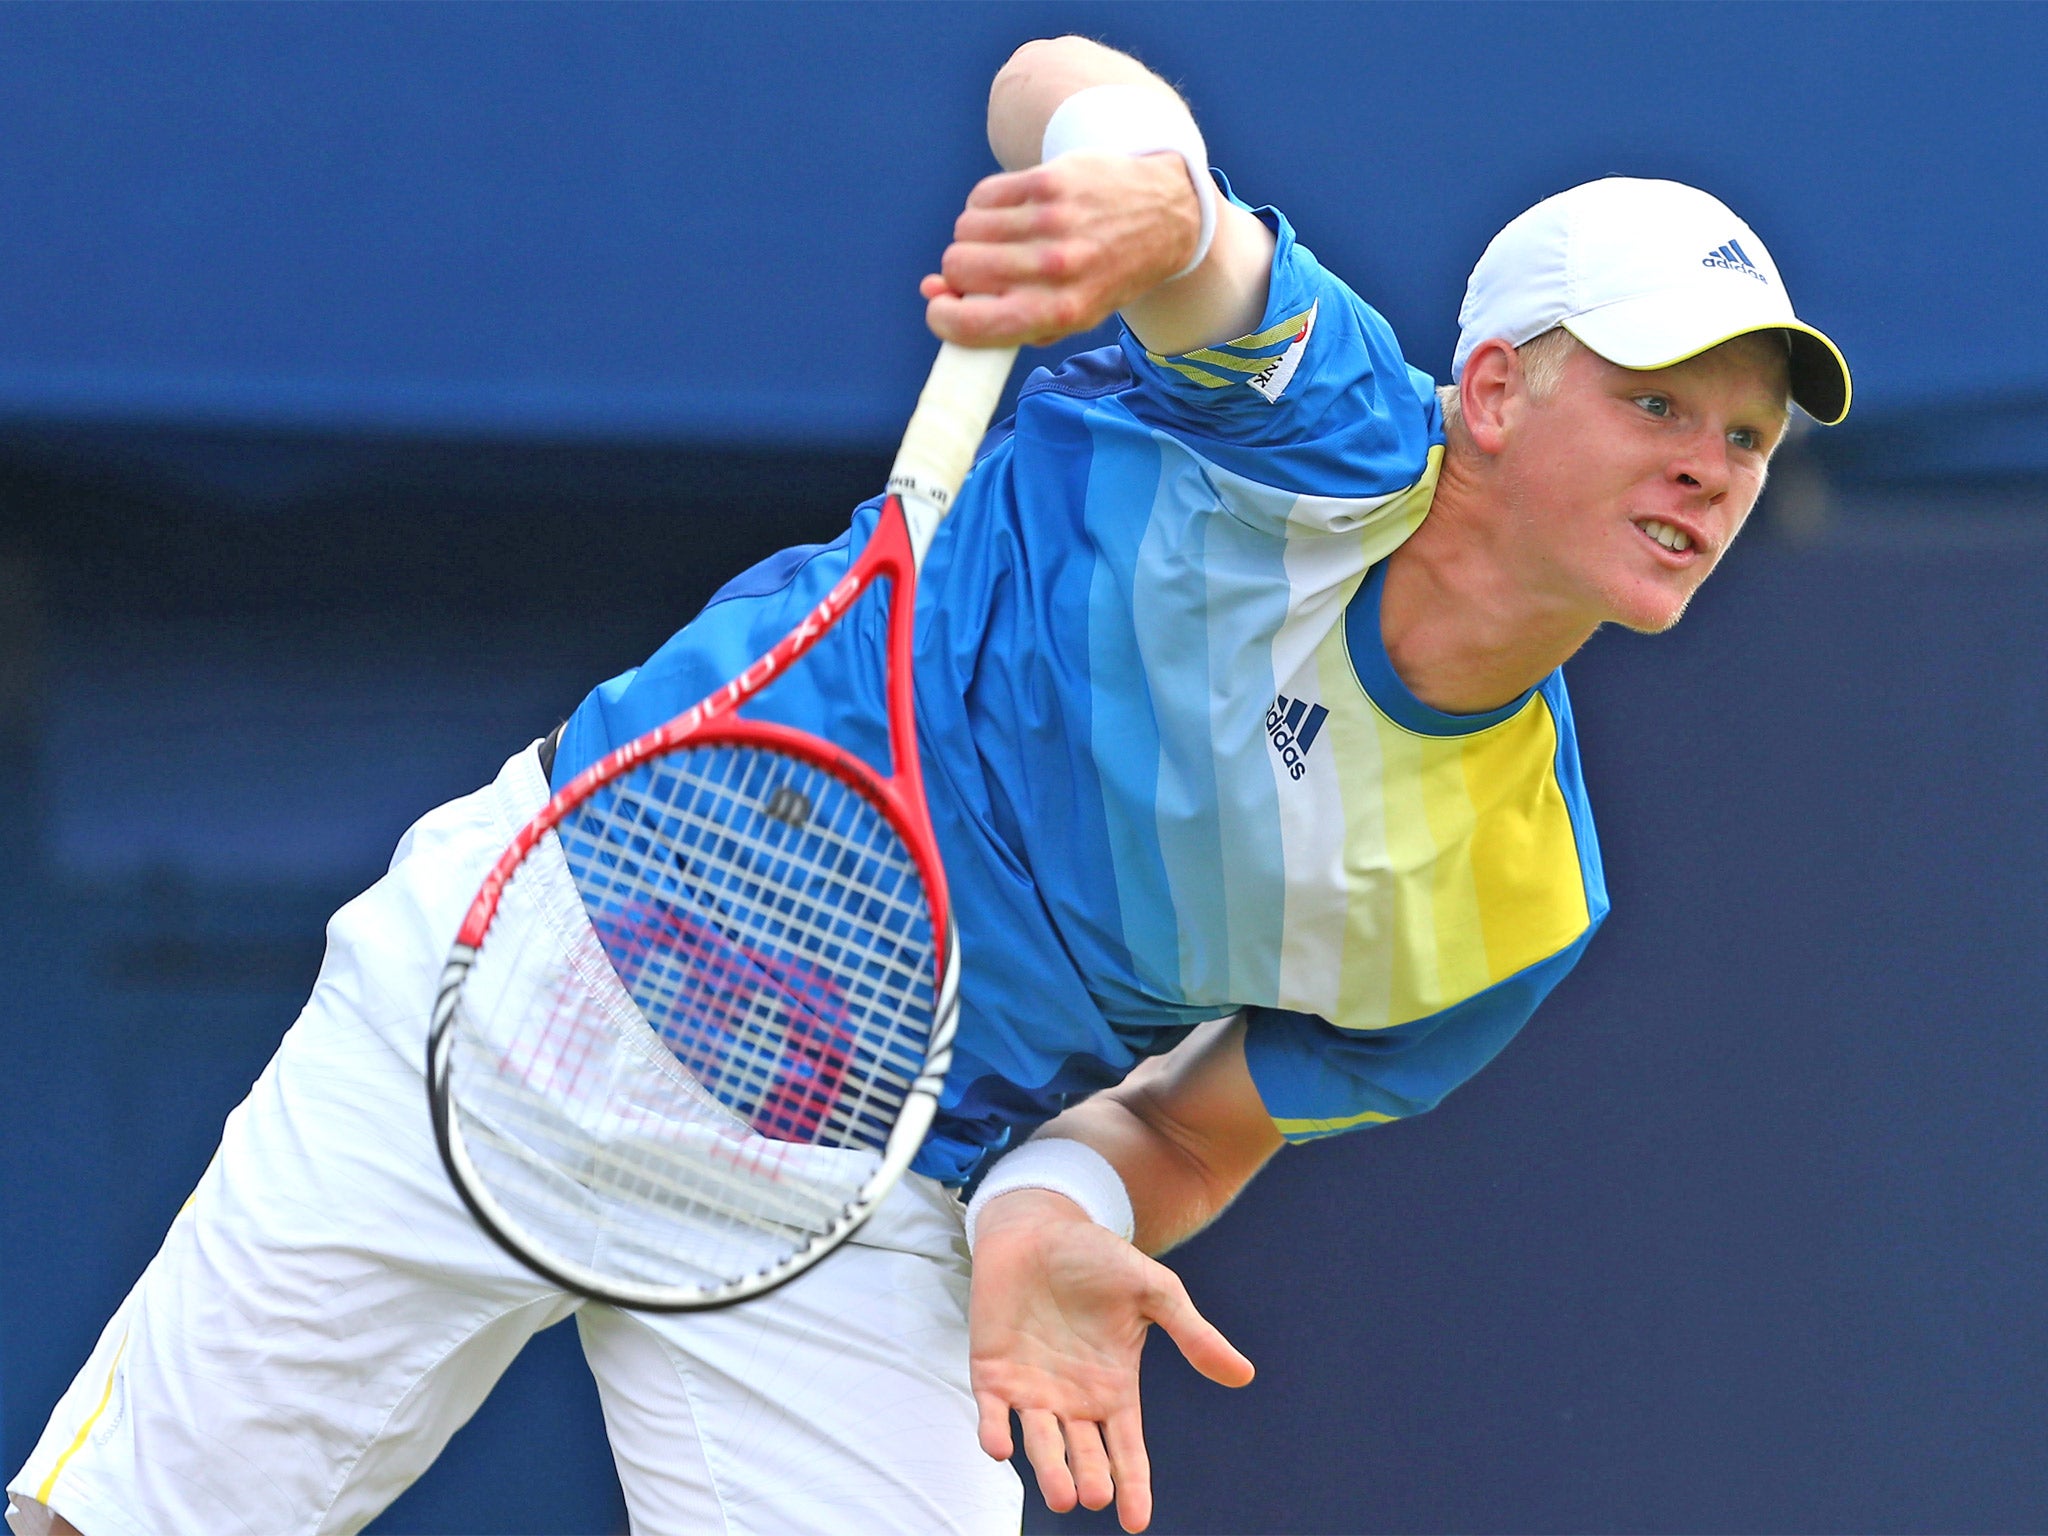 Kyle Edmund (pictured) is one of two British men to receive a wild card, along with James Ward